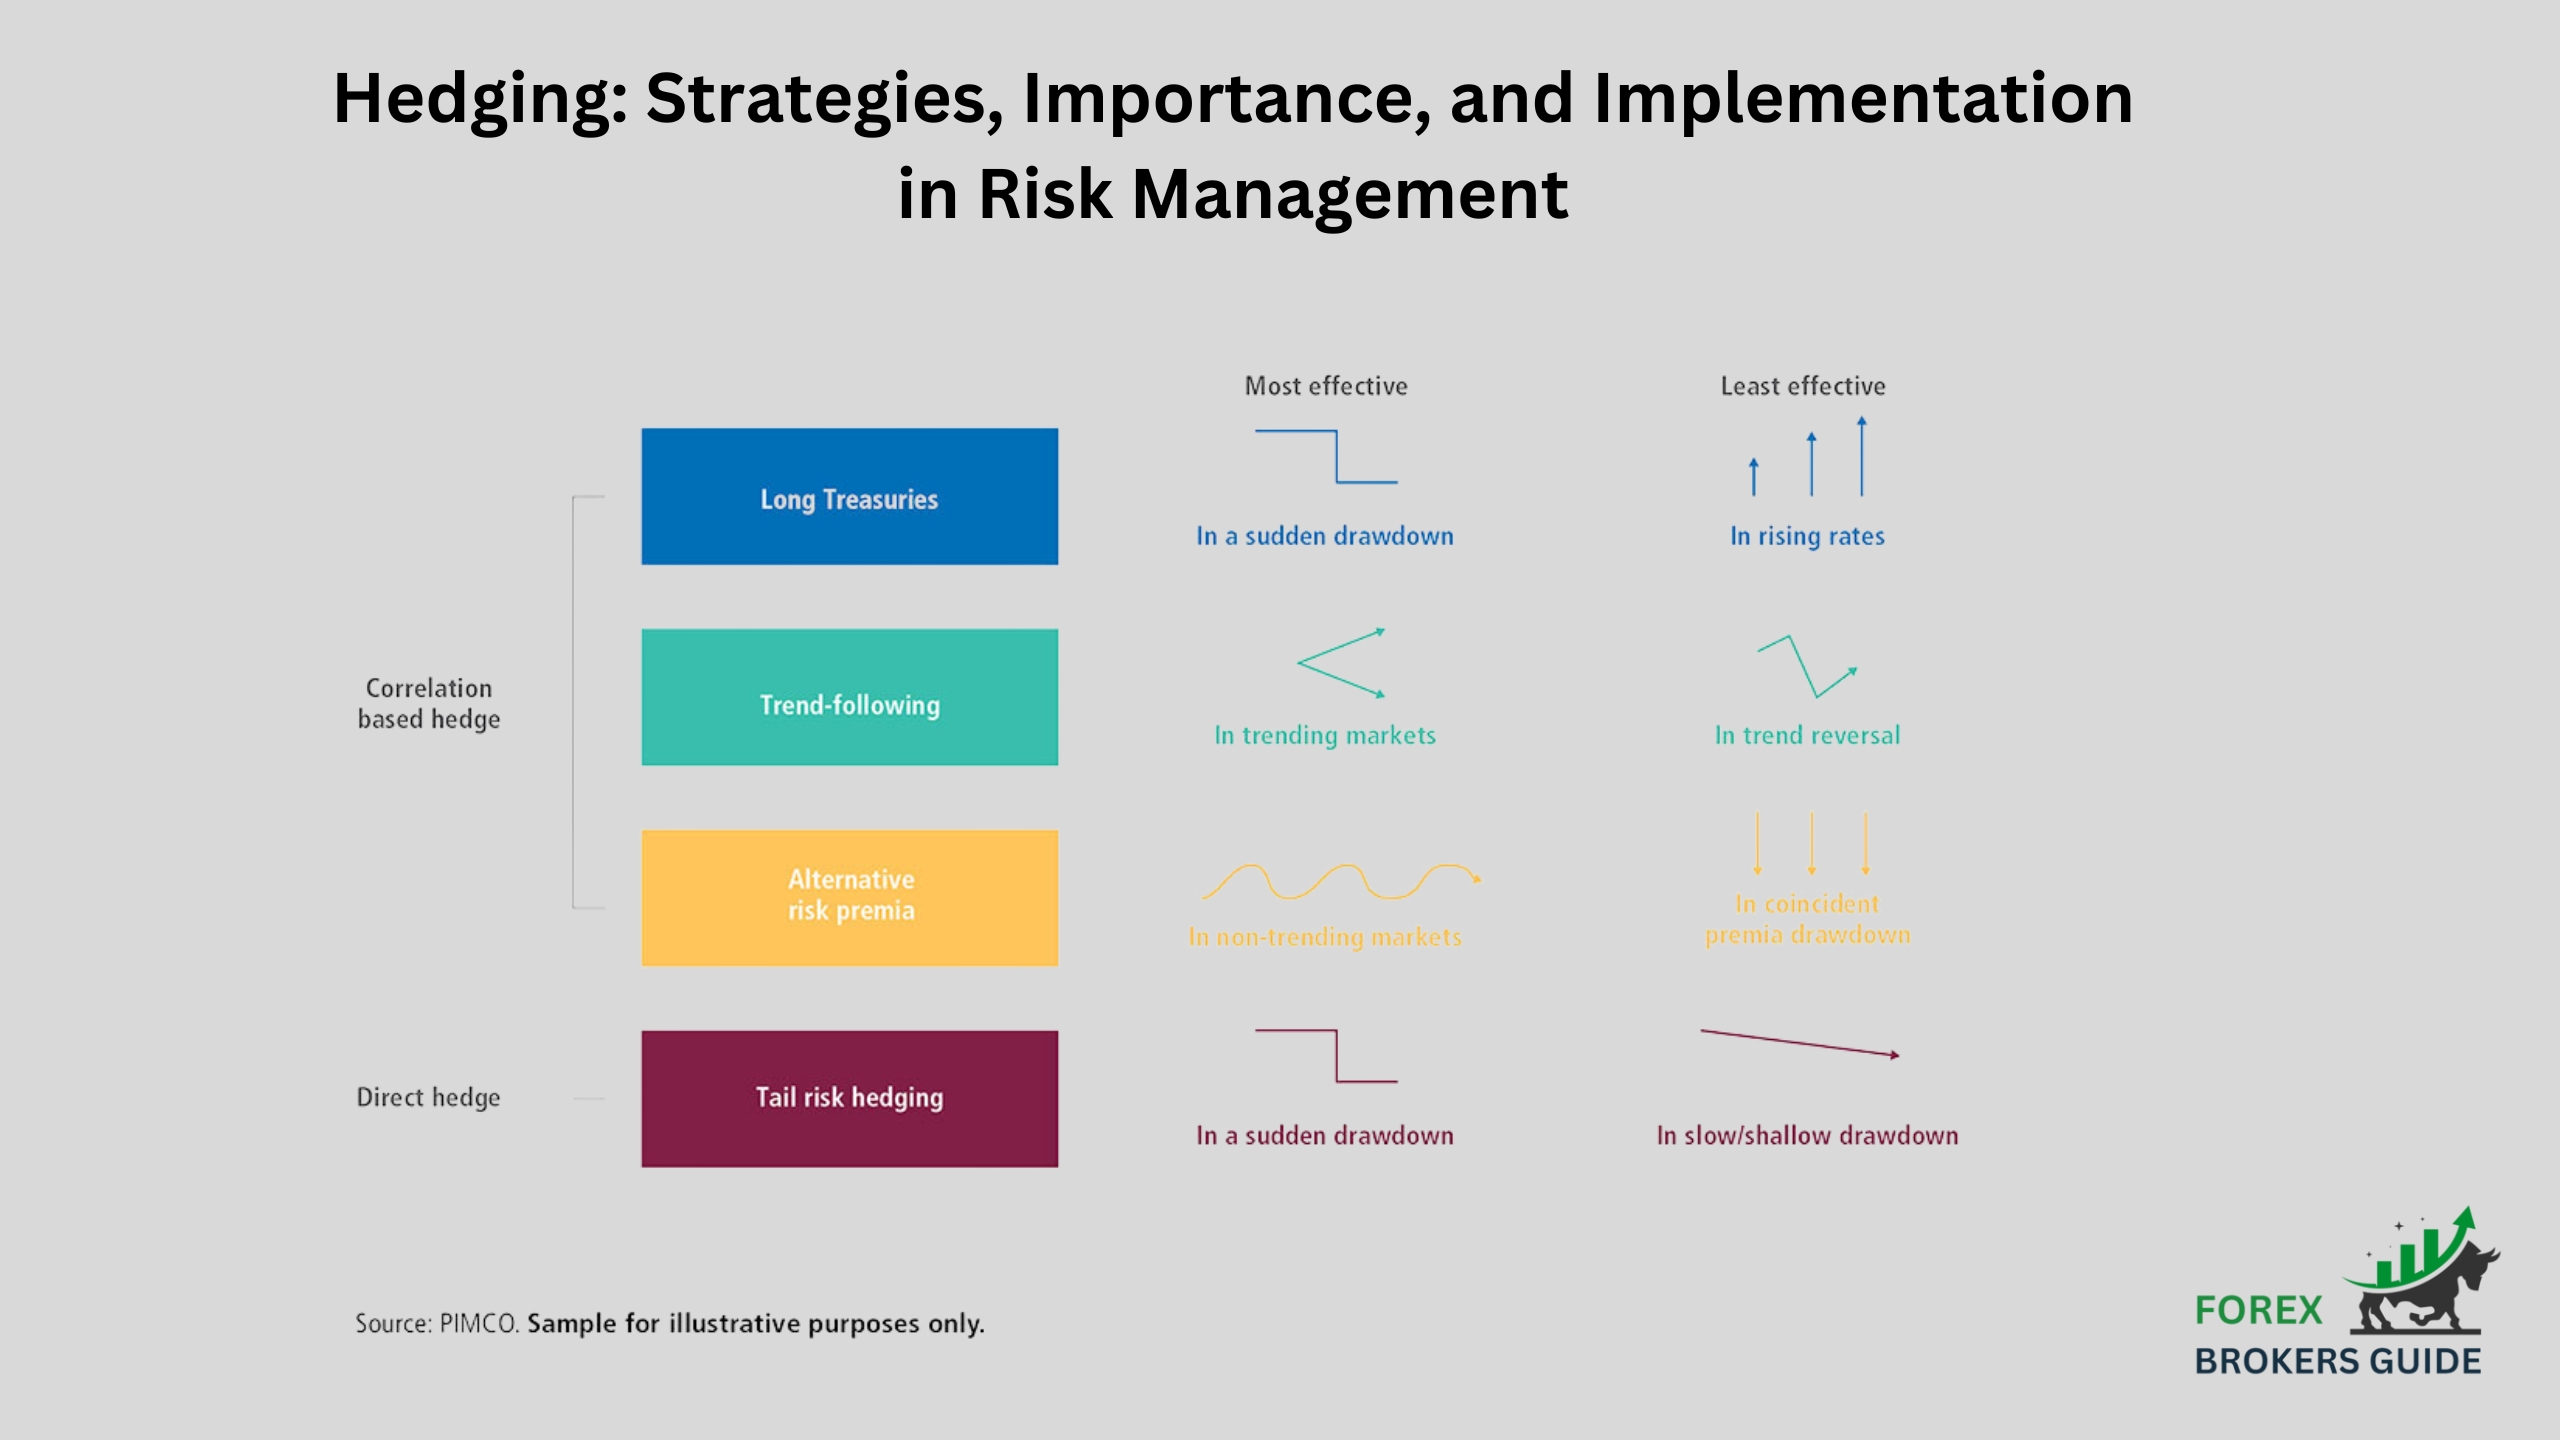 Hedging: Strategies, Importance, and Implementation in Risk Management